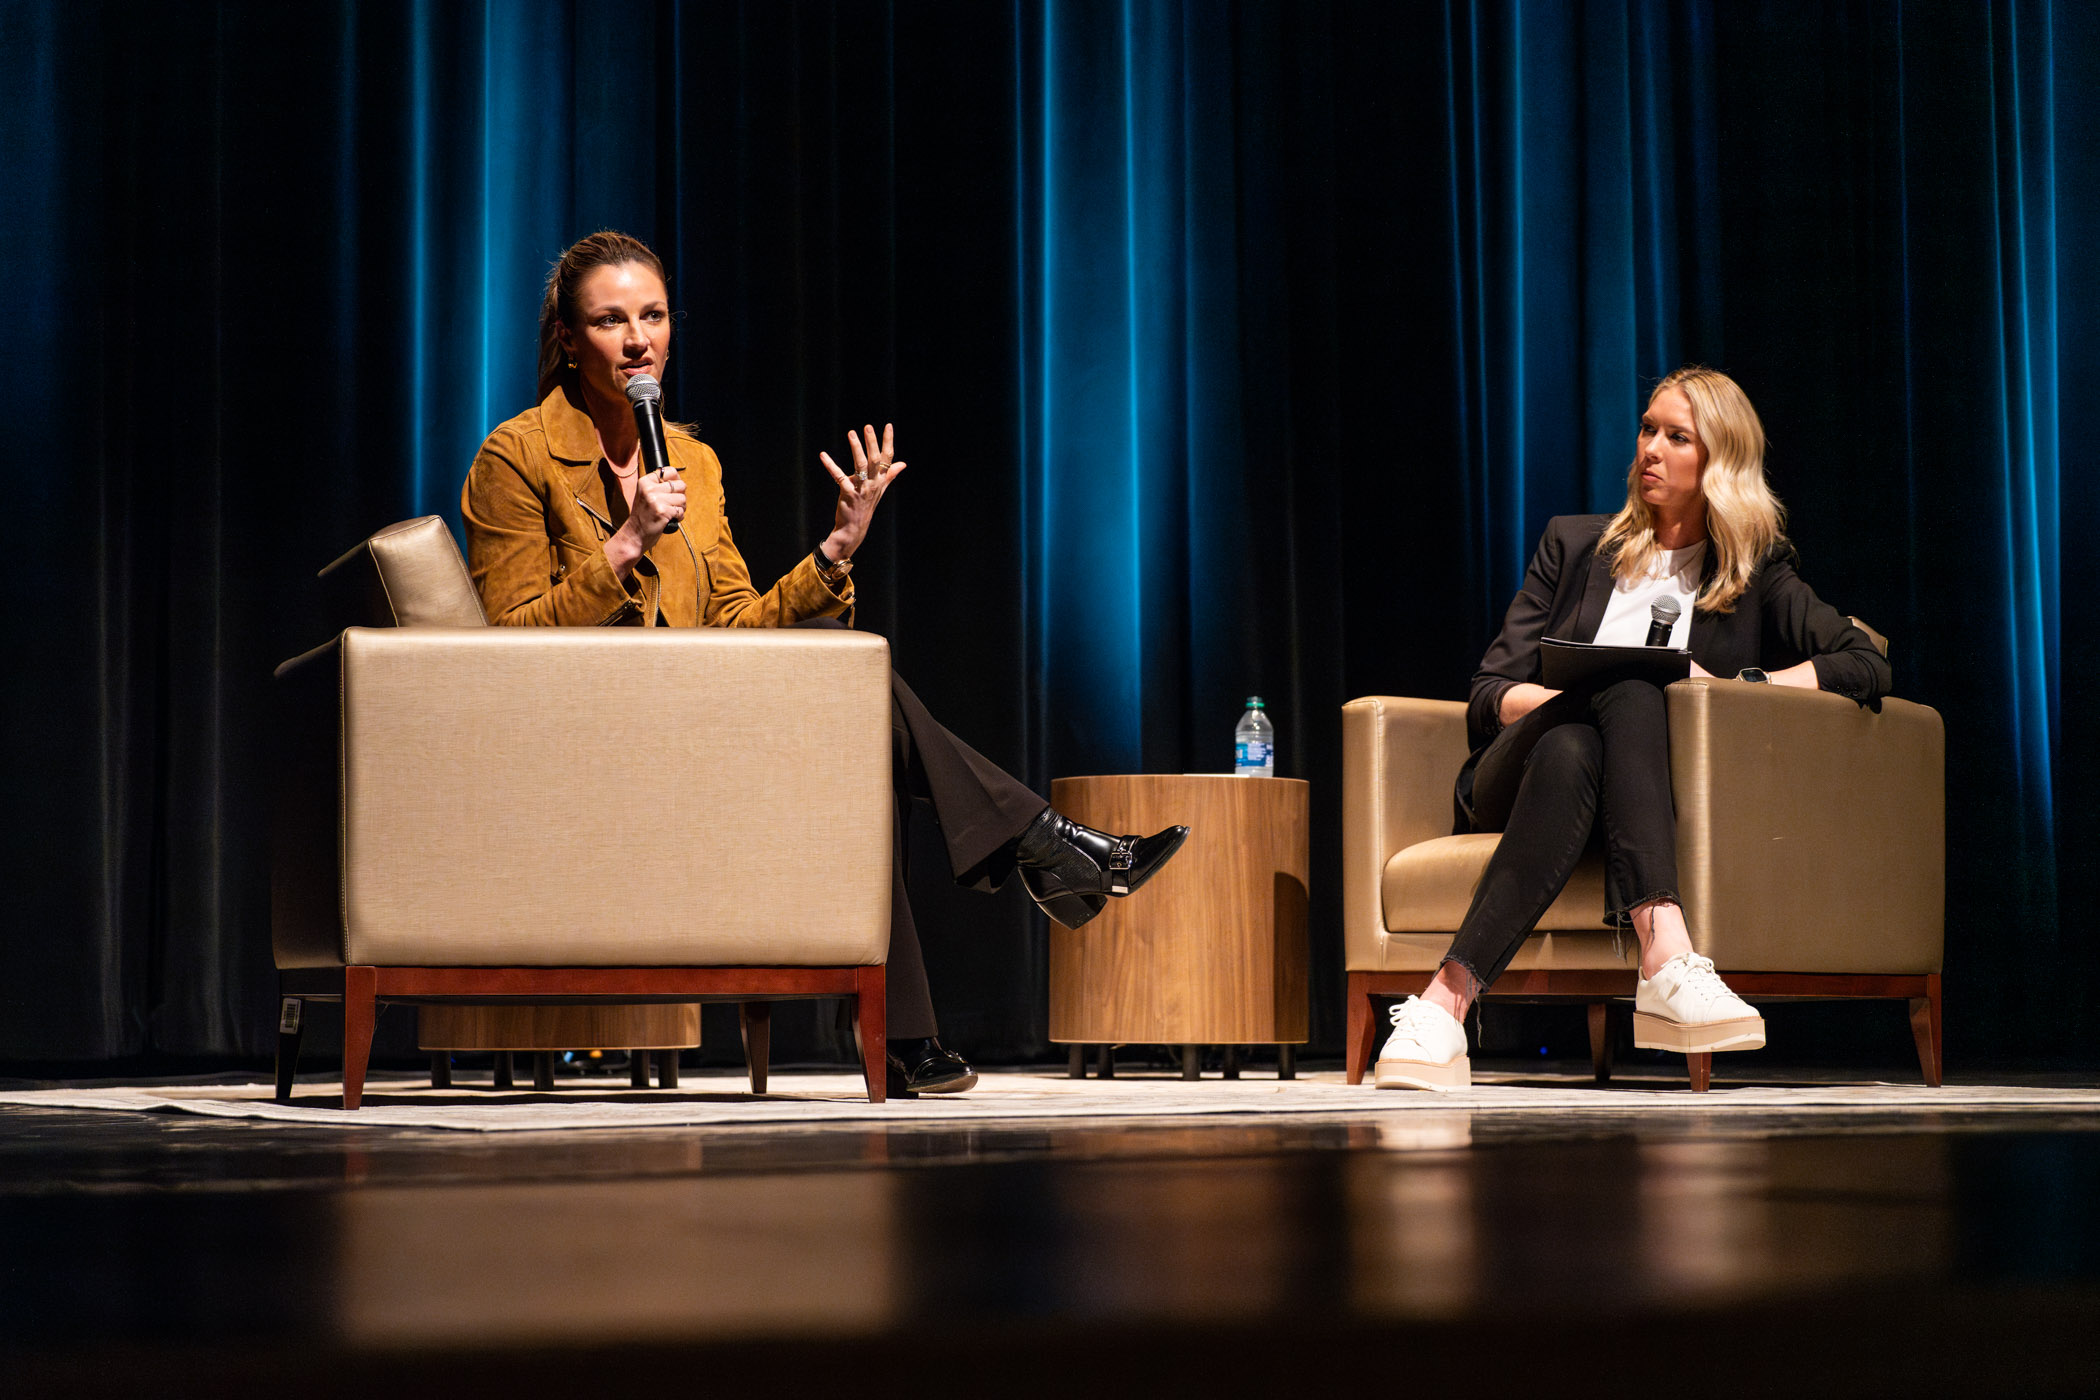 Erin Andrews (left) and moderator Joey Bailey (right) on the mainstage of Bettersworth Auditorium